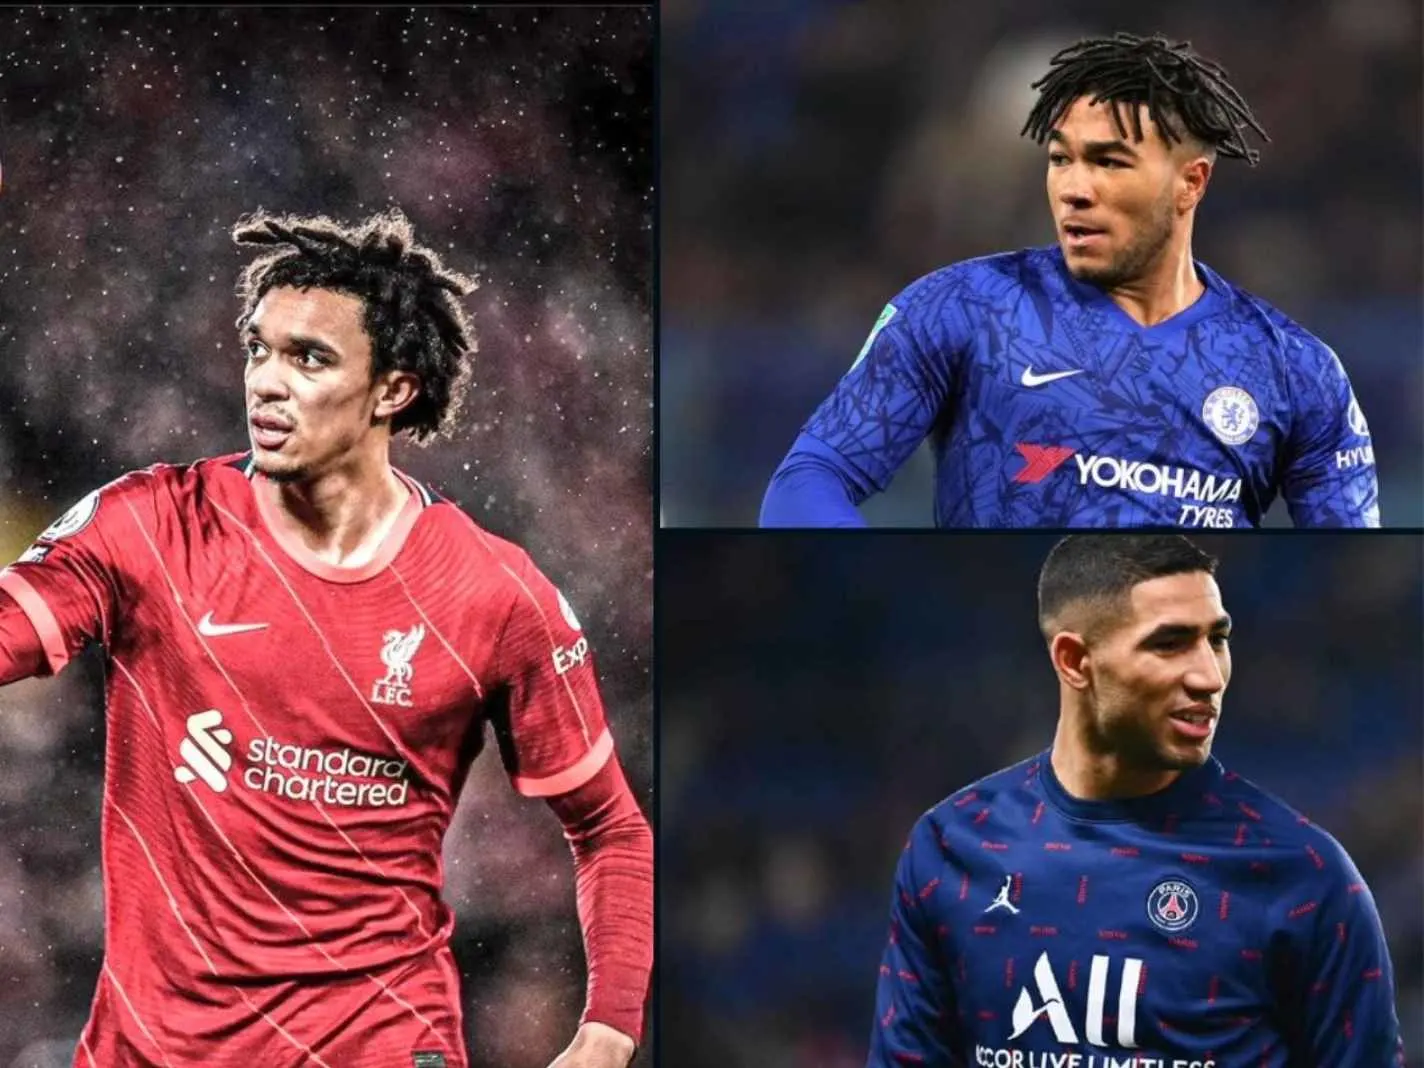 Dani Alves has named Liverpool’s Trent Alexander-Arnold, Chelsea’s Reece James and Paris Saint-Germain’s Achraf Hakimi as the current right-backs he keeps an eye on.